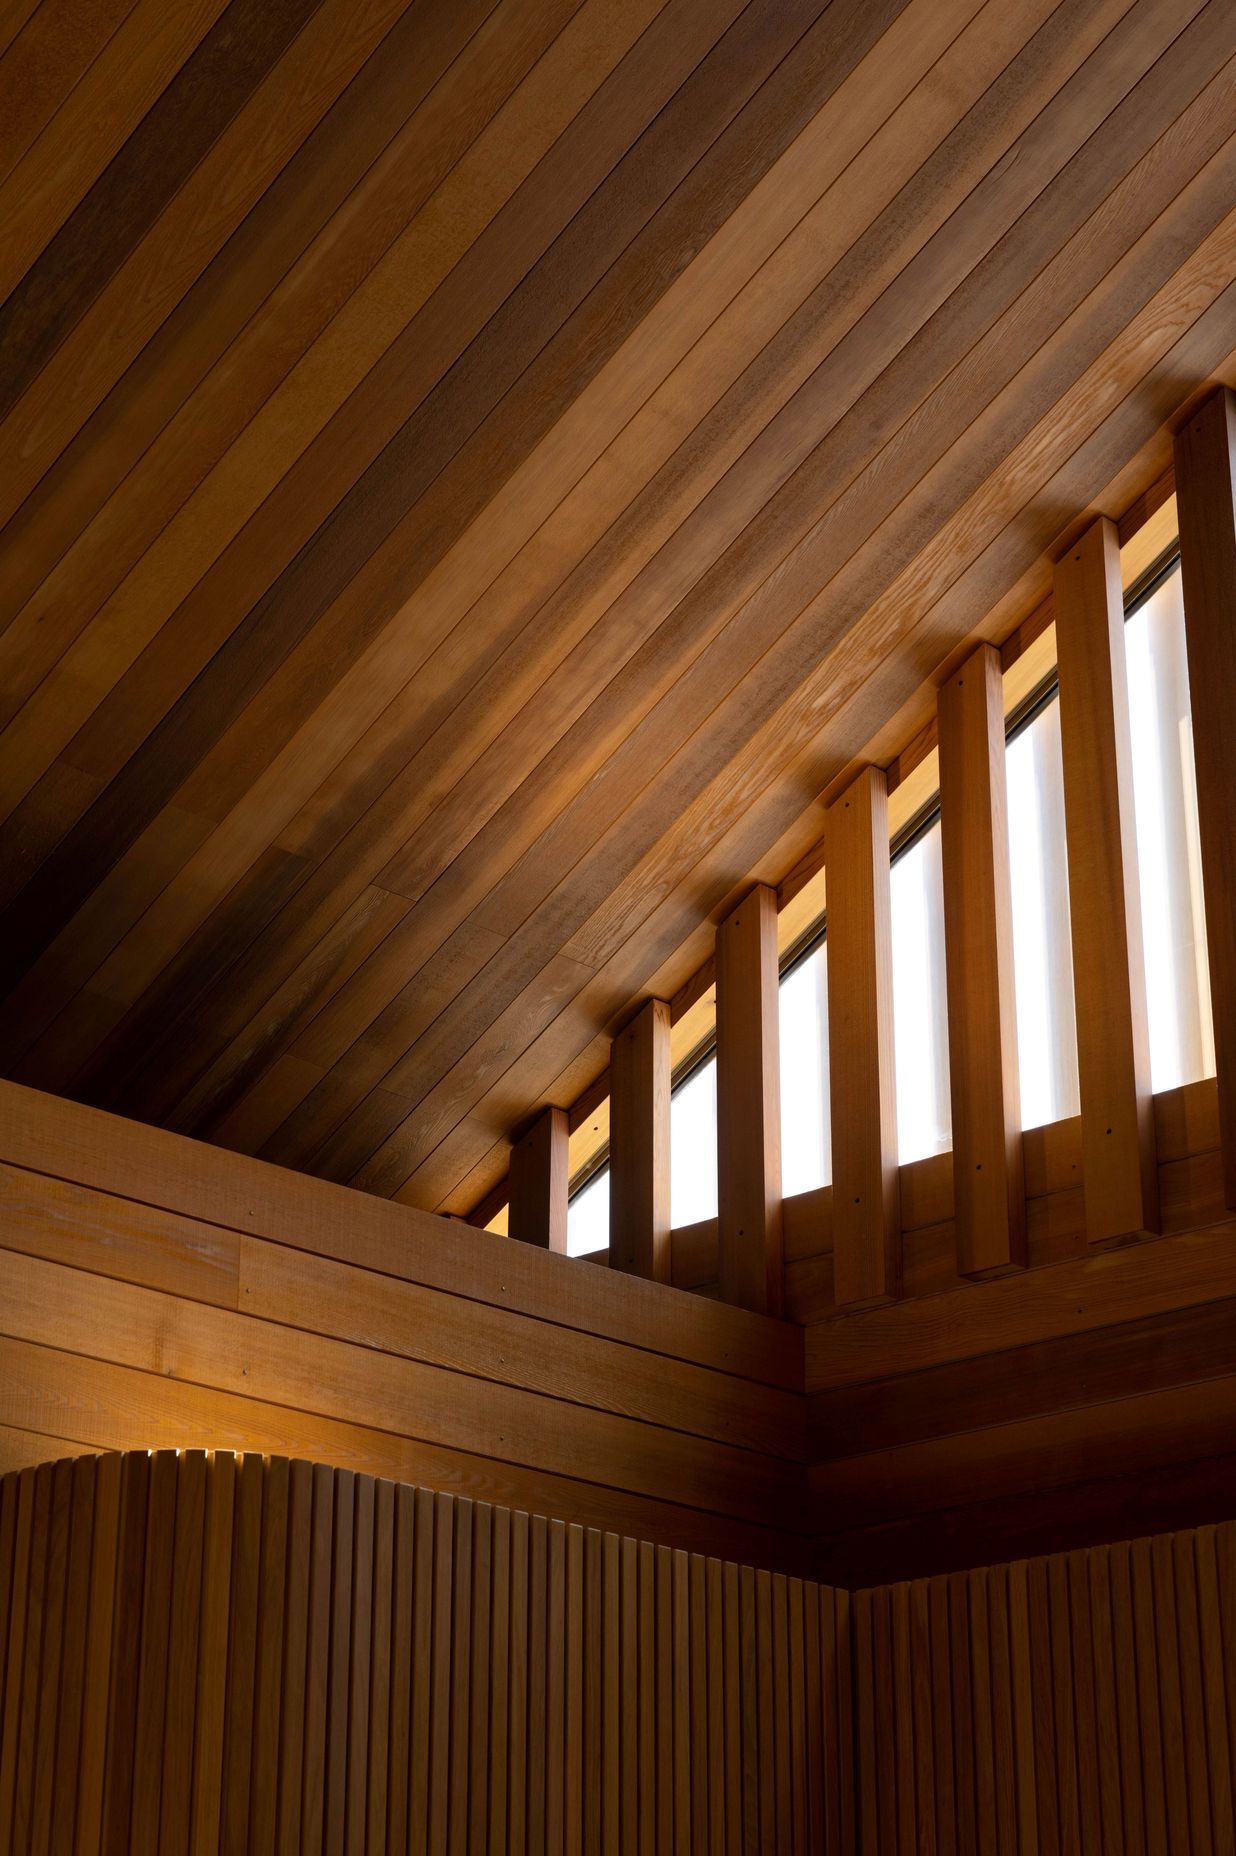 Used as cladding, panelling and screening, Western Red Cedar creates warmth in any space.